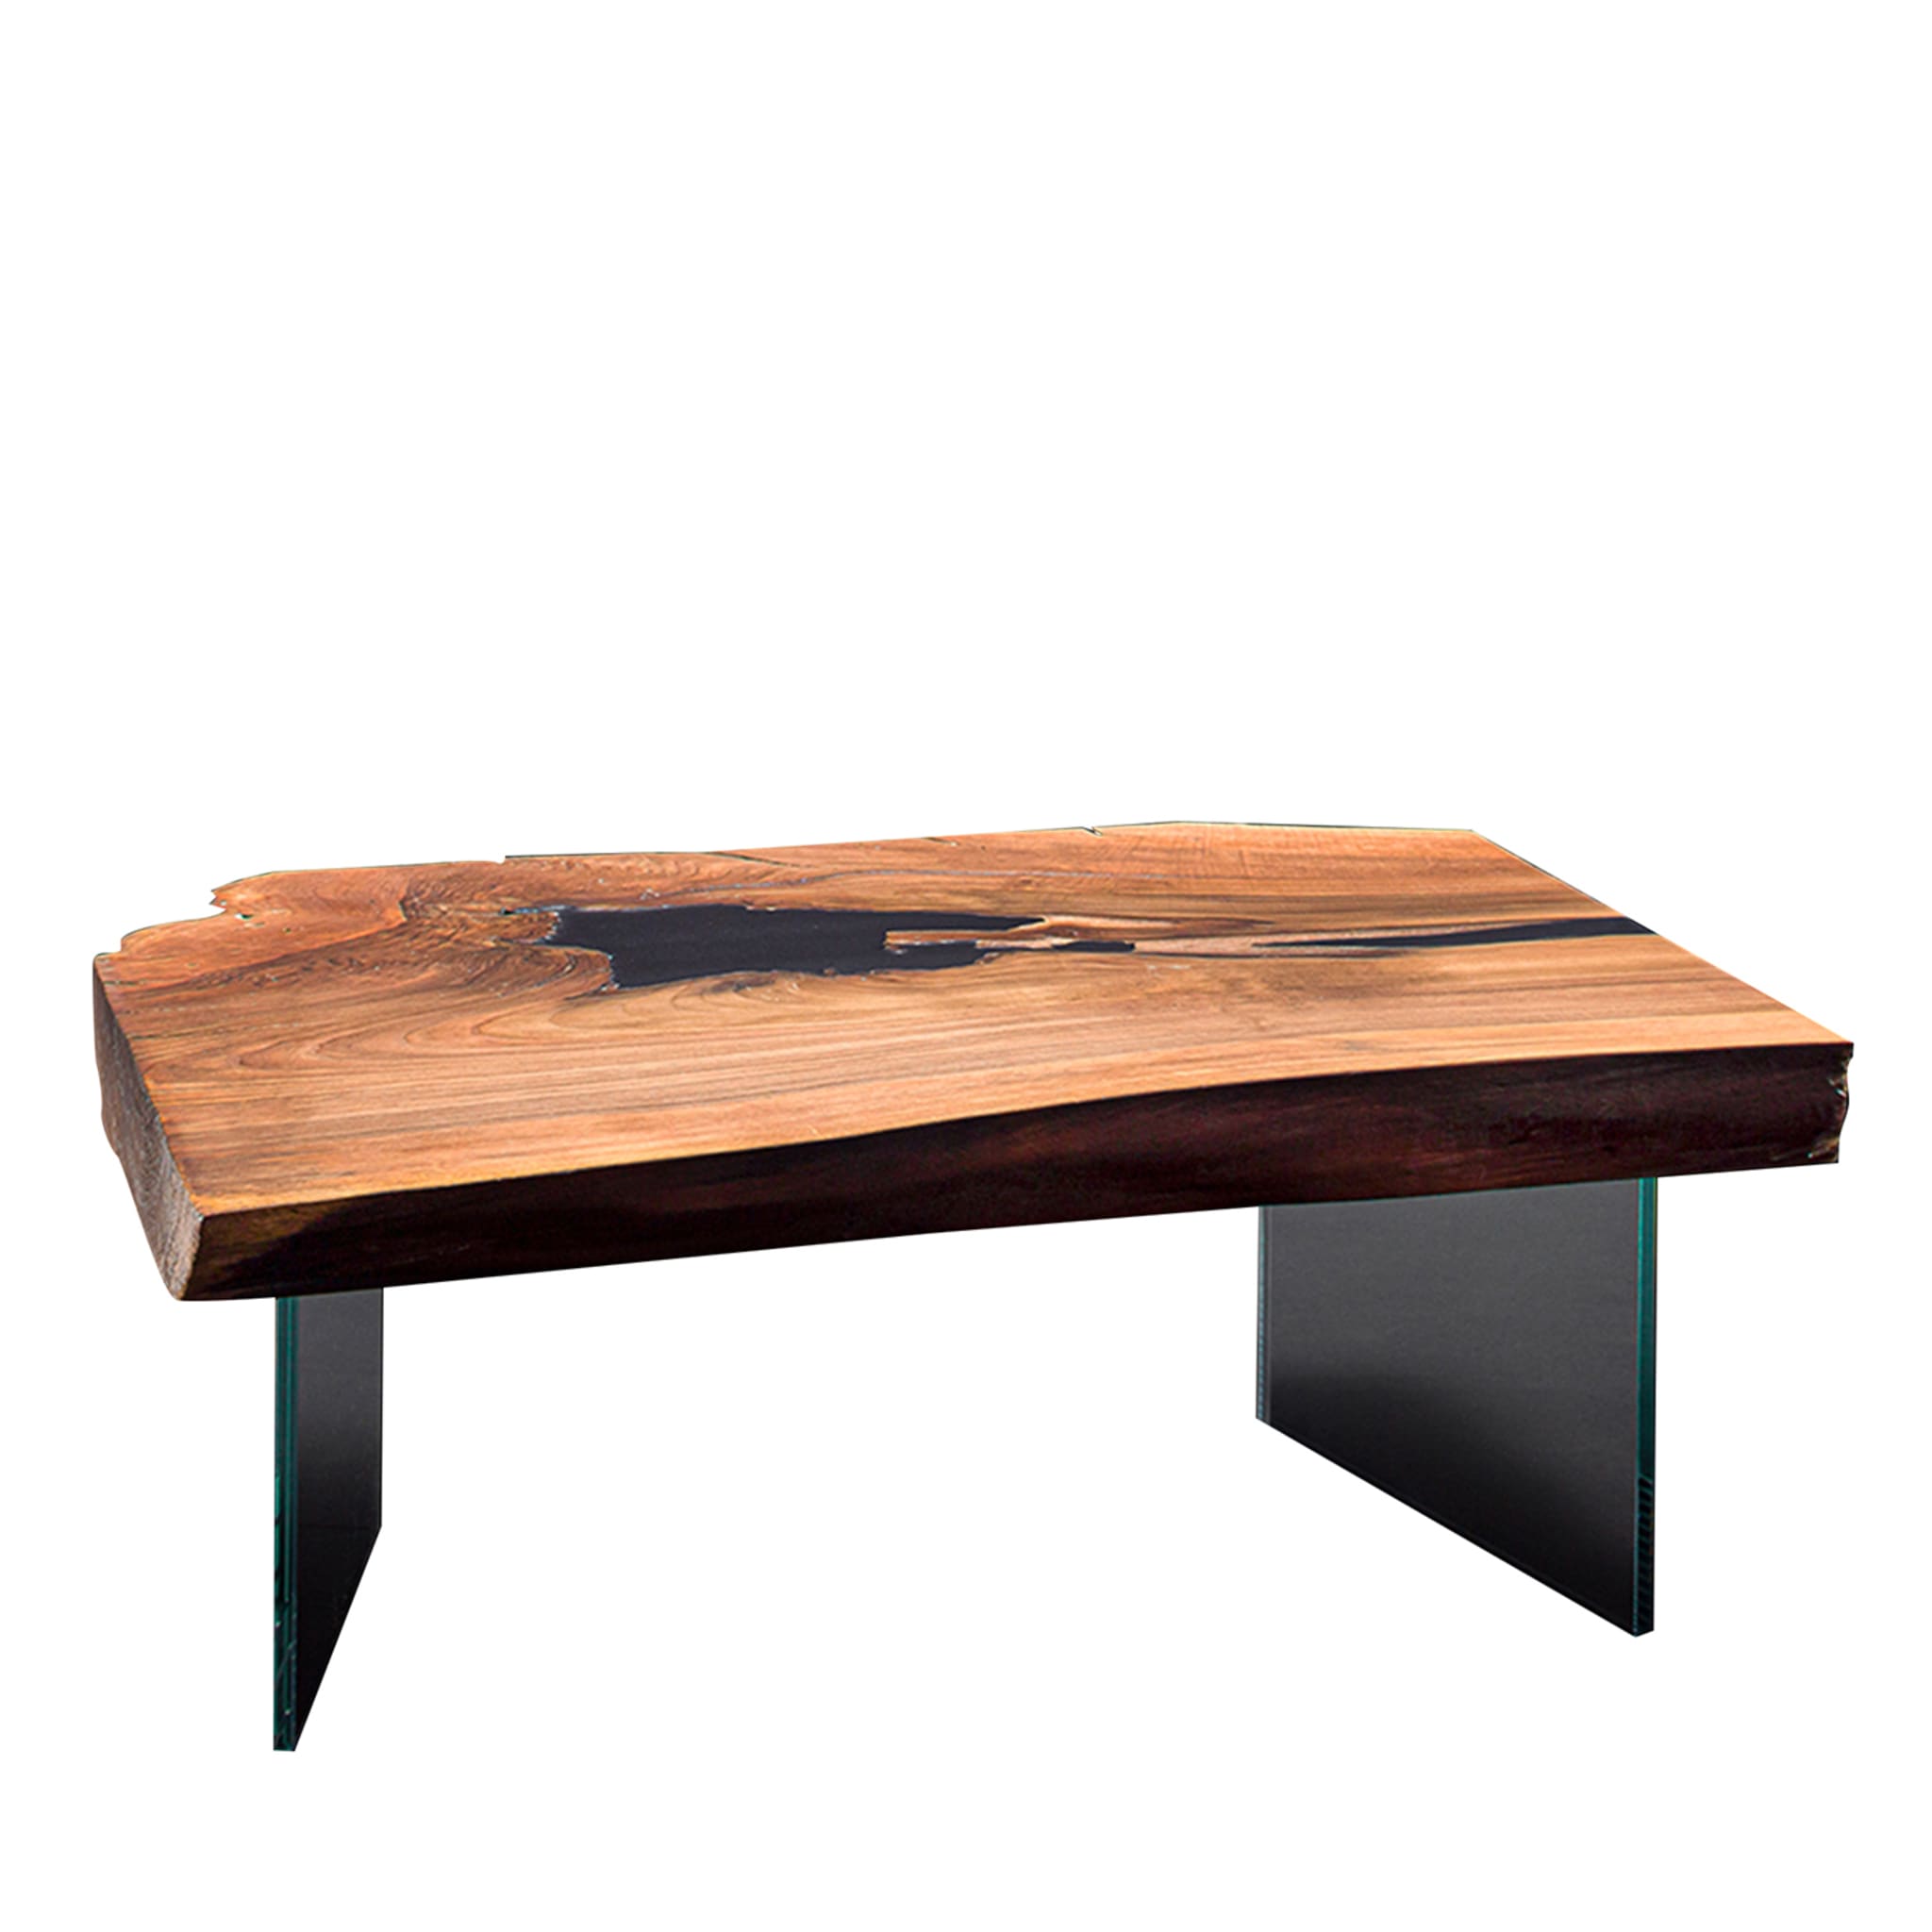 Walnut and resin side table - Main view